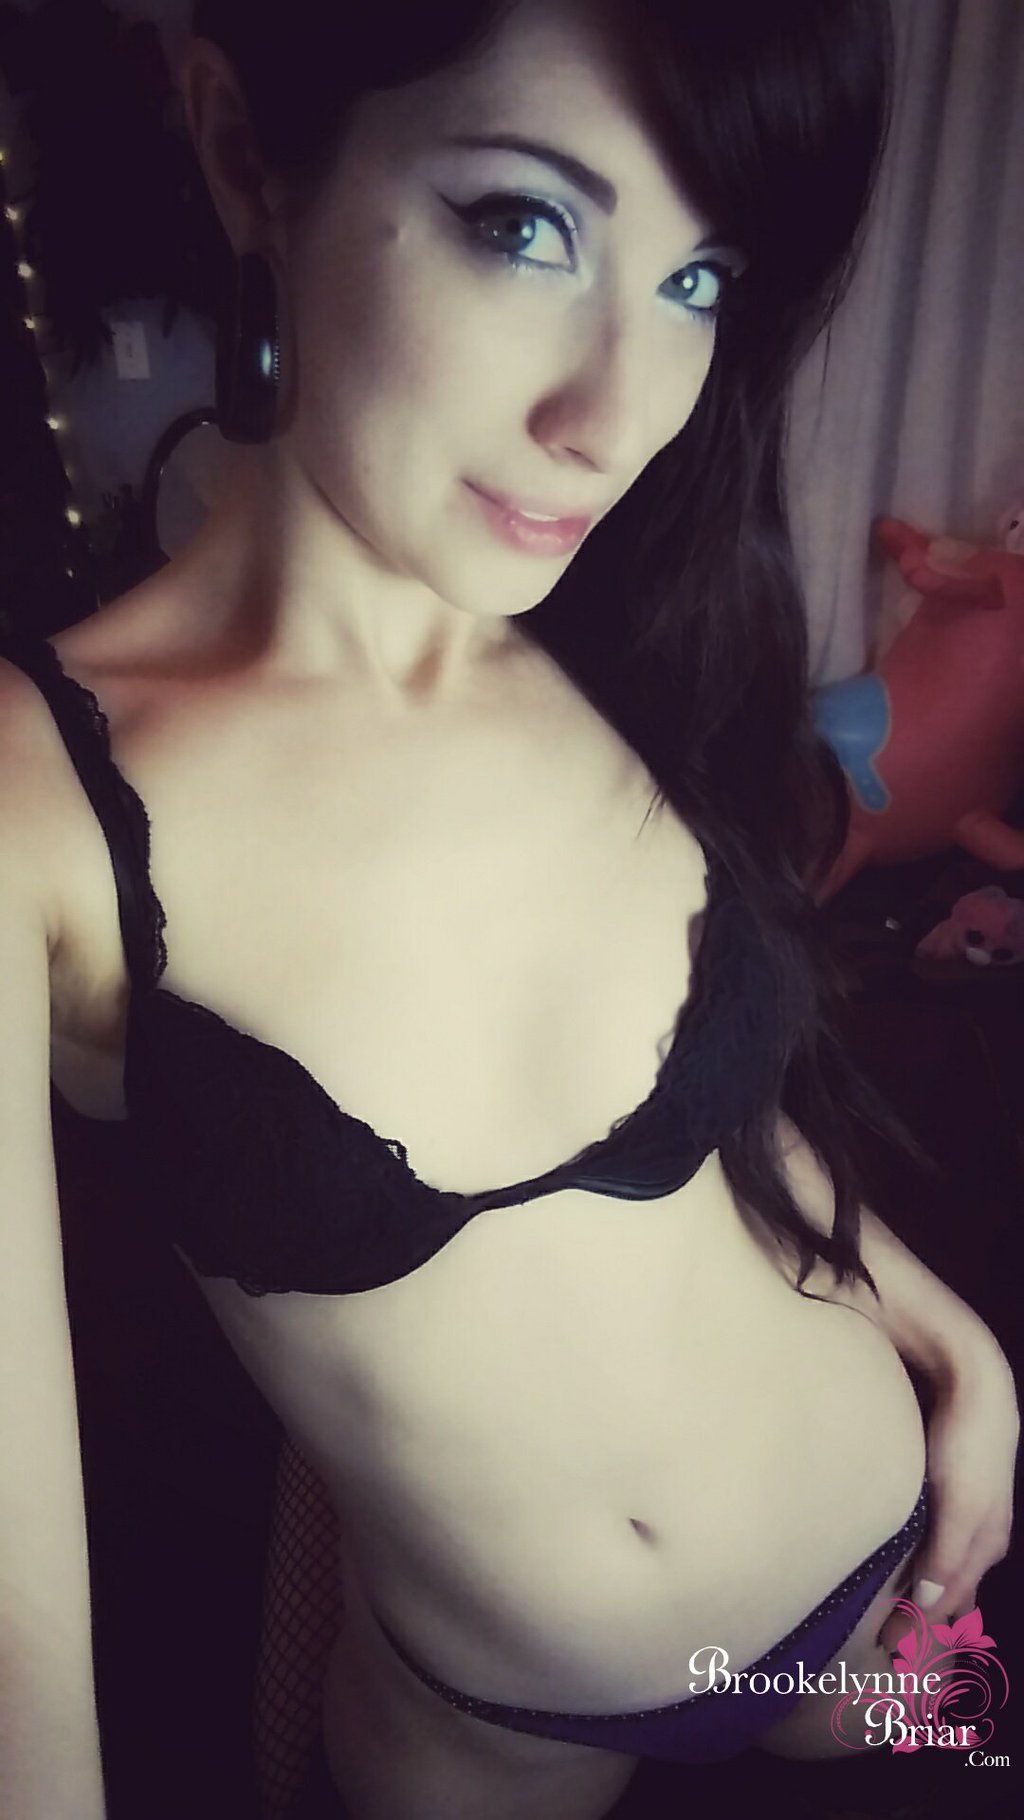 brookelynnebriar:  Look at me - online all early &amp; stuff 😊  Come and play